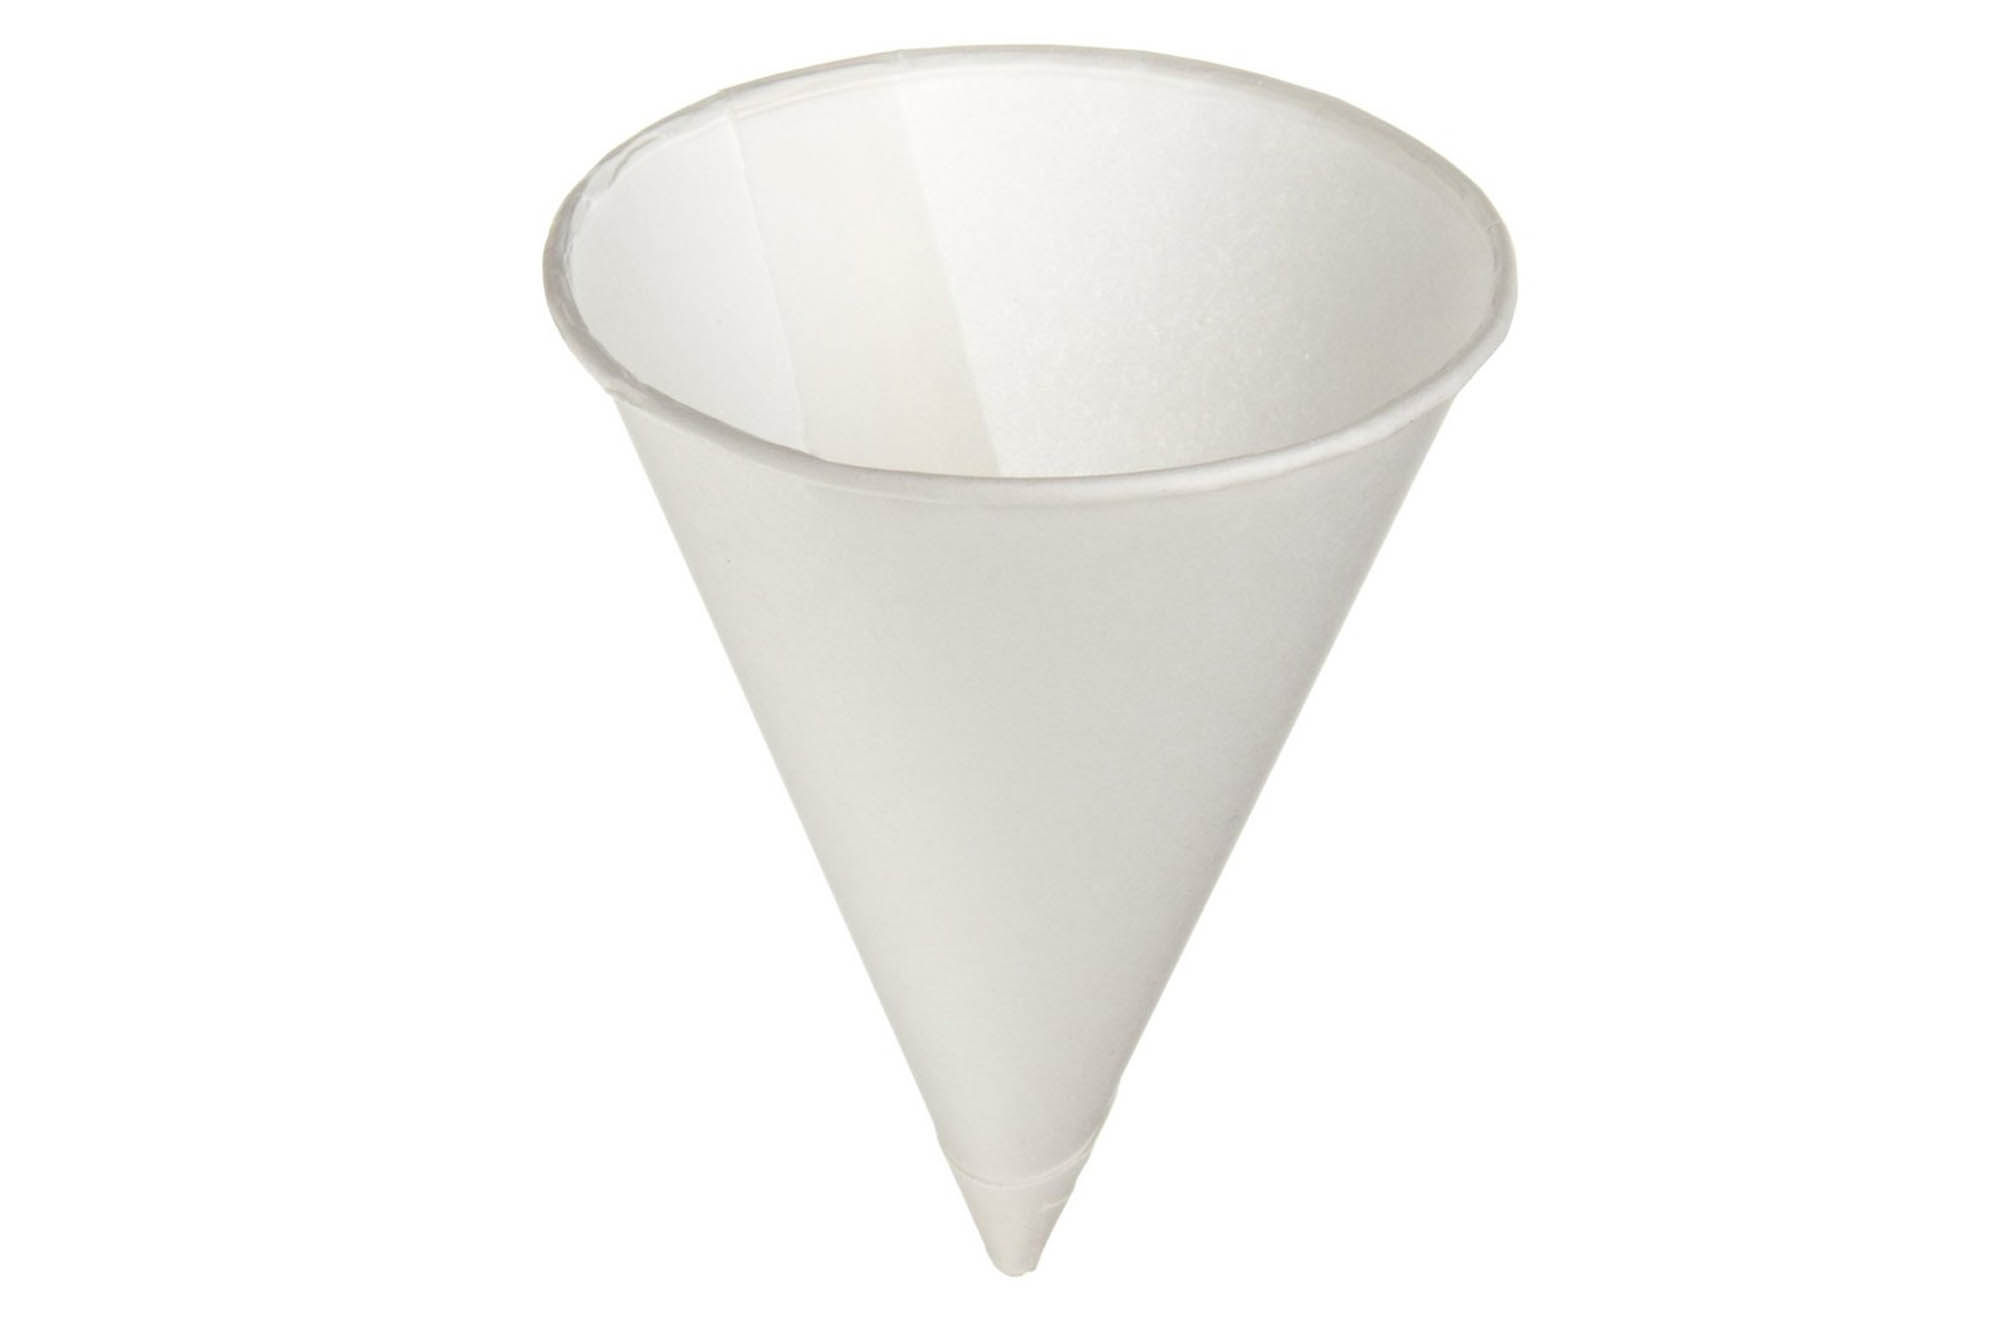 Water cone